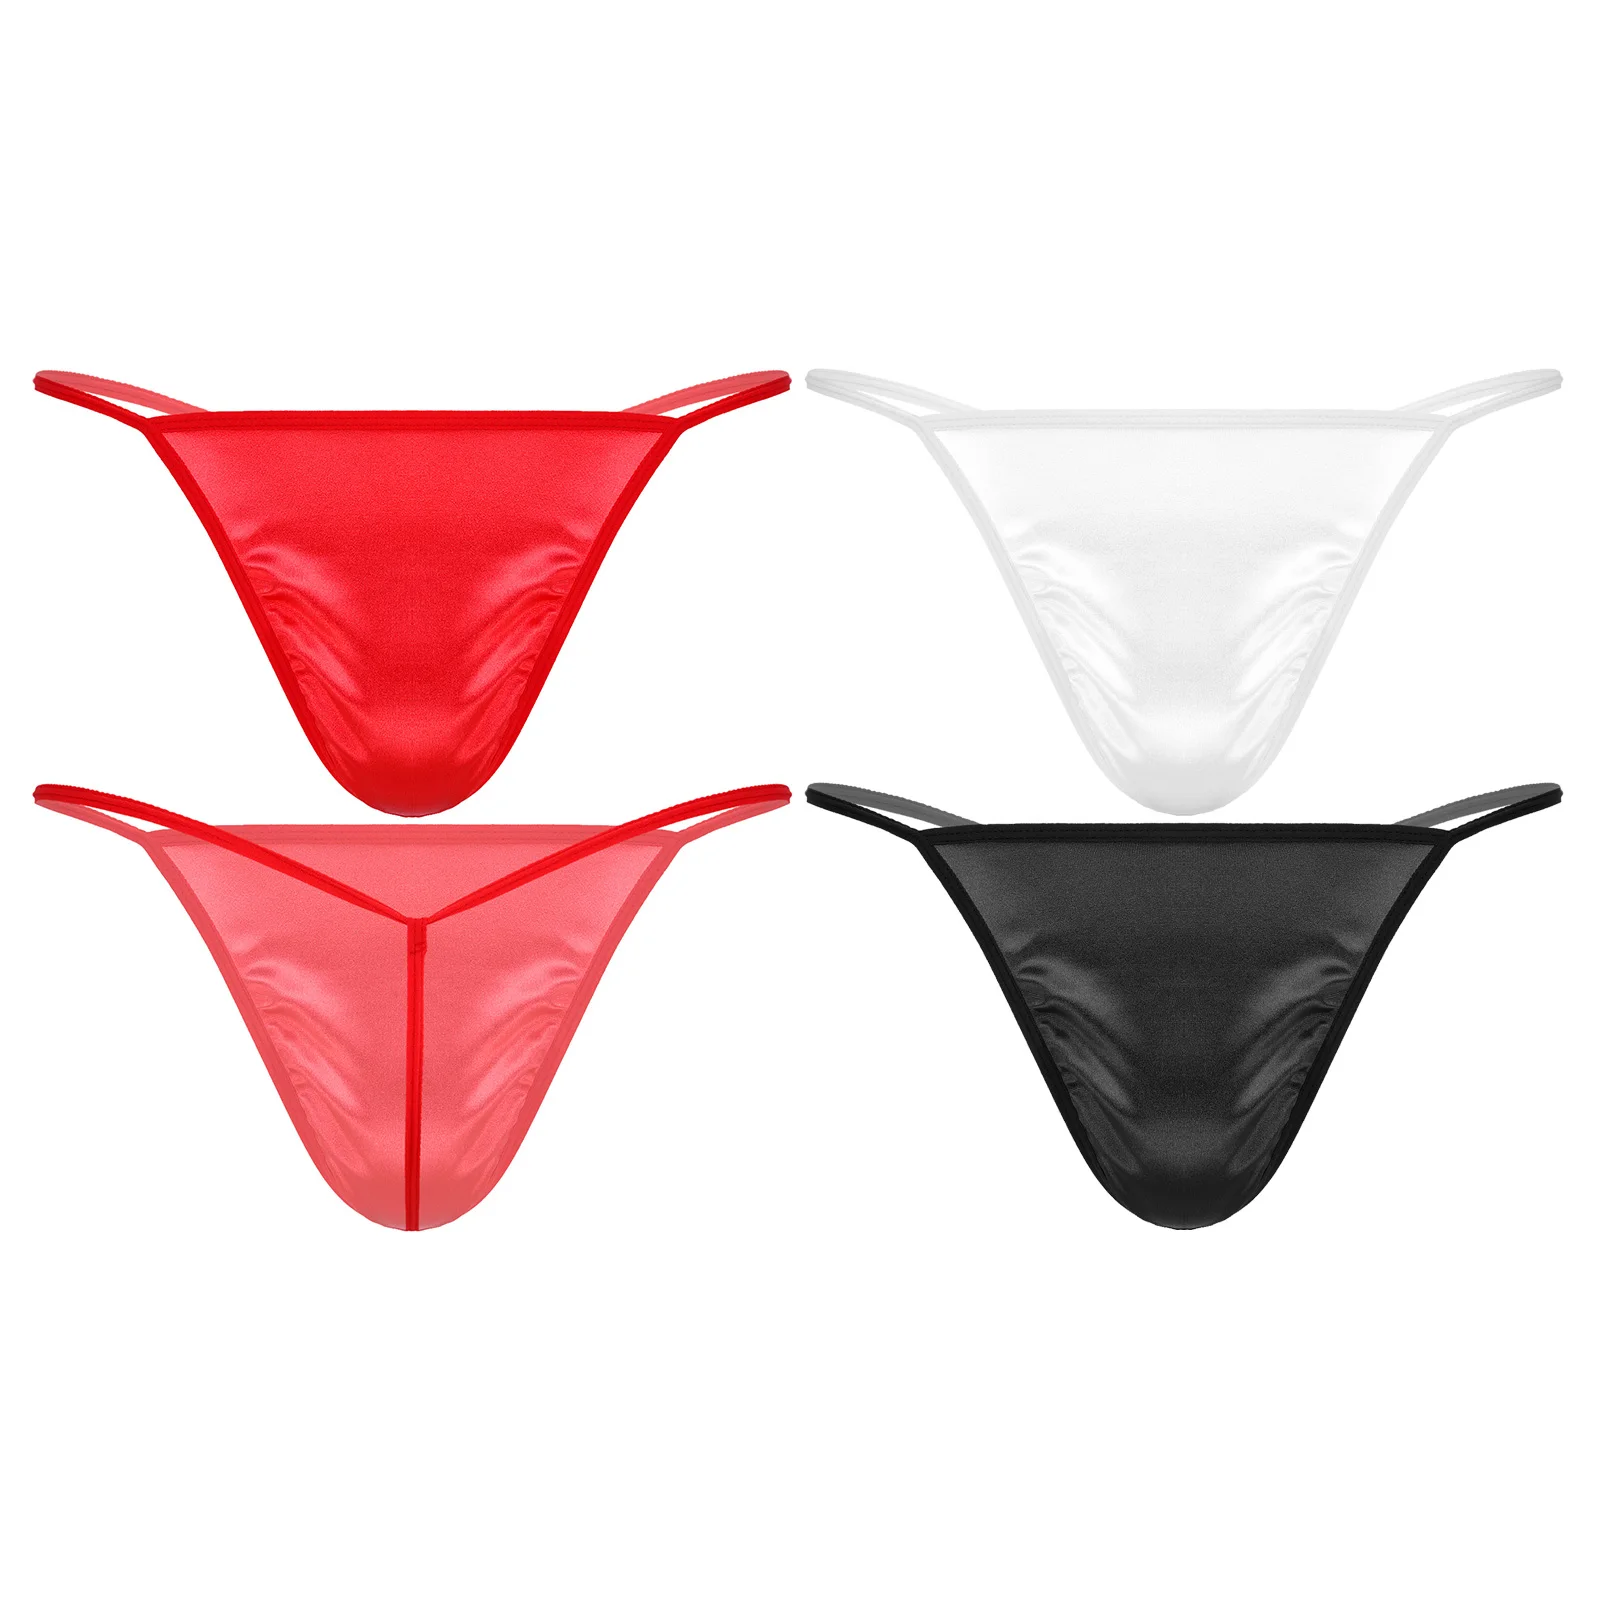 Sexy Mens Open Butt T-back Underpants Satin Bulge Pouch Sissy Panties Lingerie G-string Thongs Solid Color Low Waist Underwear white knee high stockings